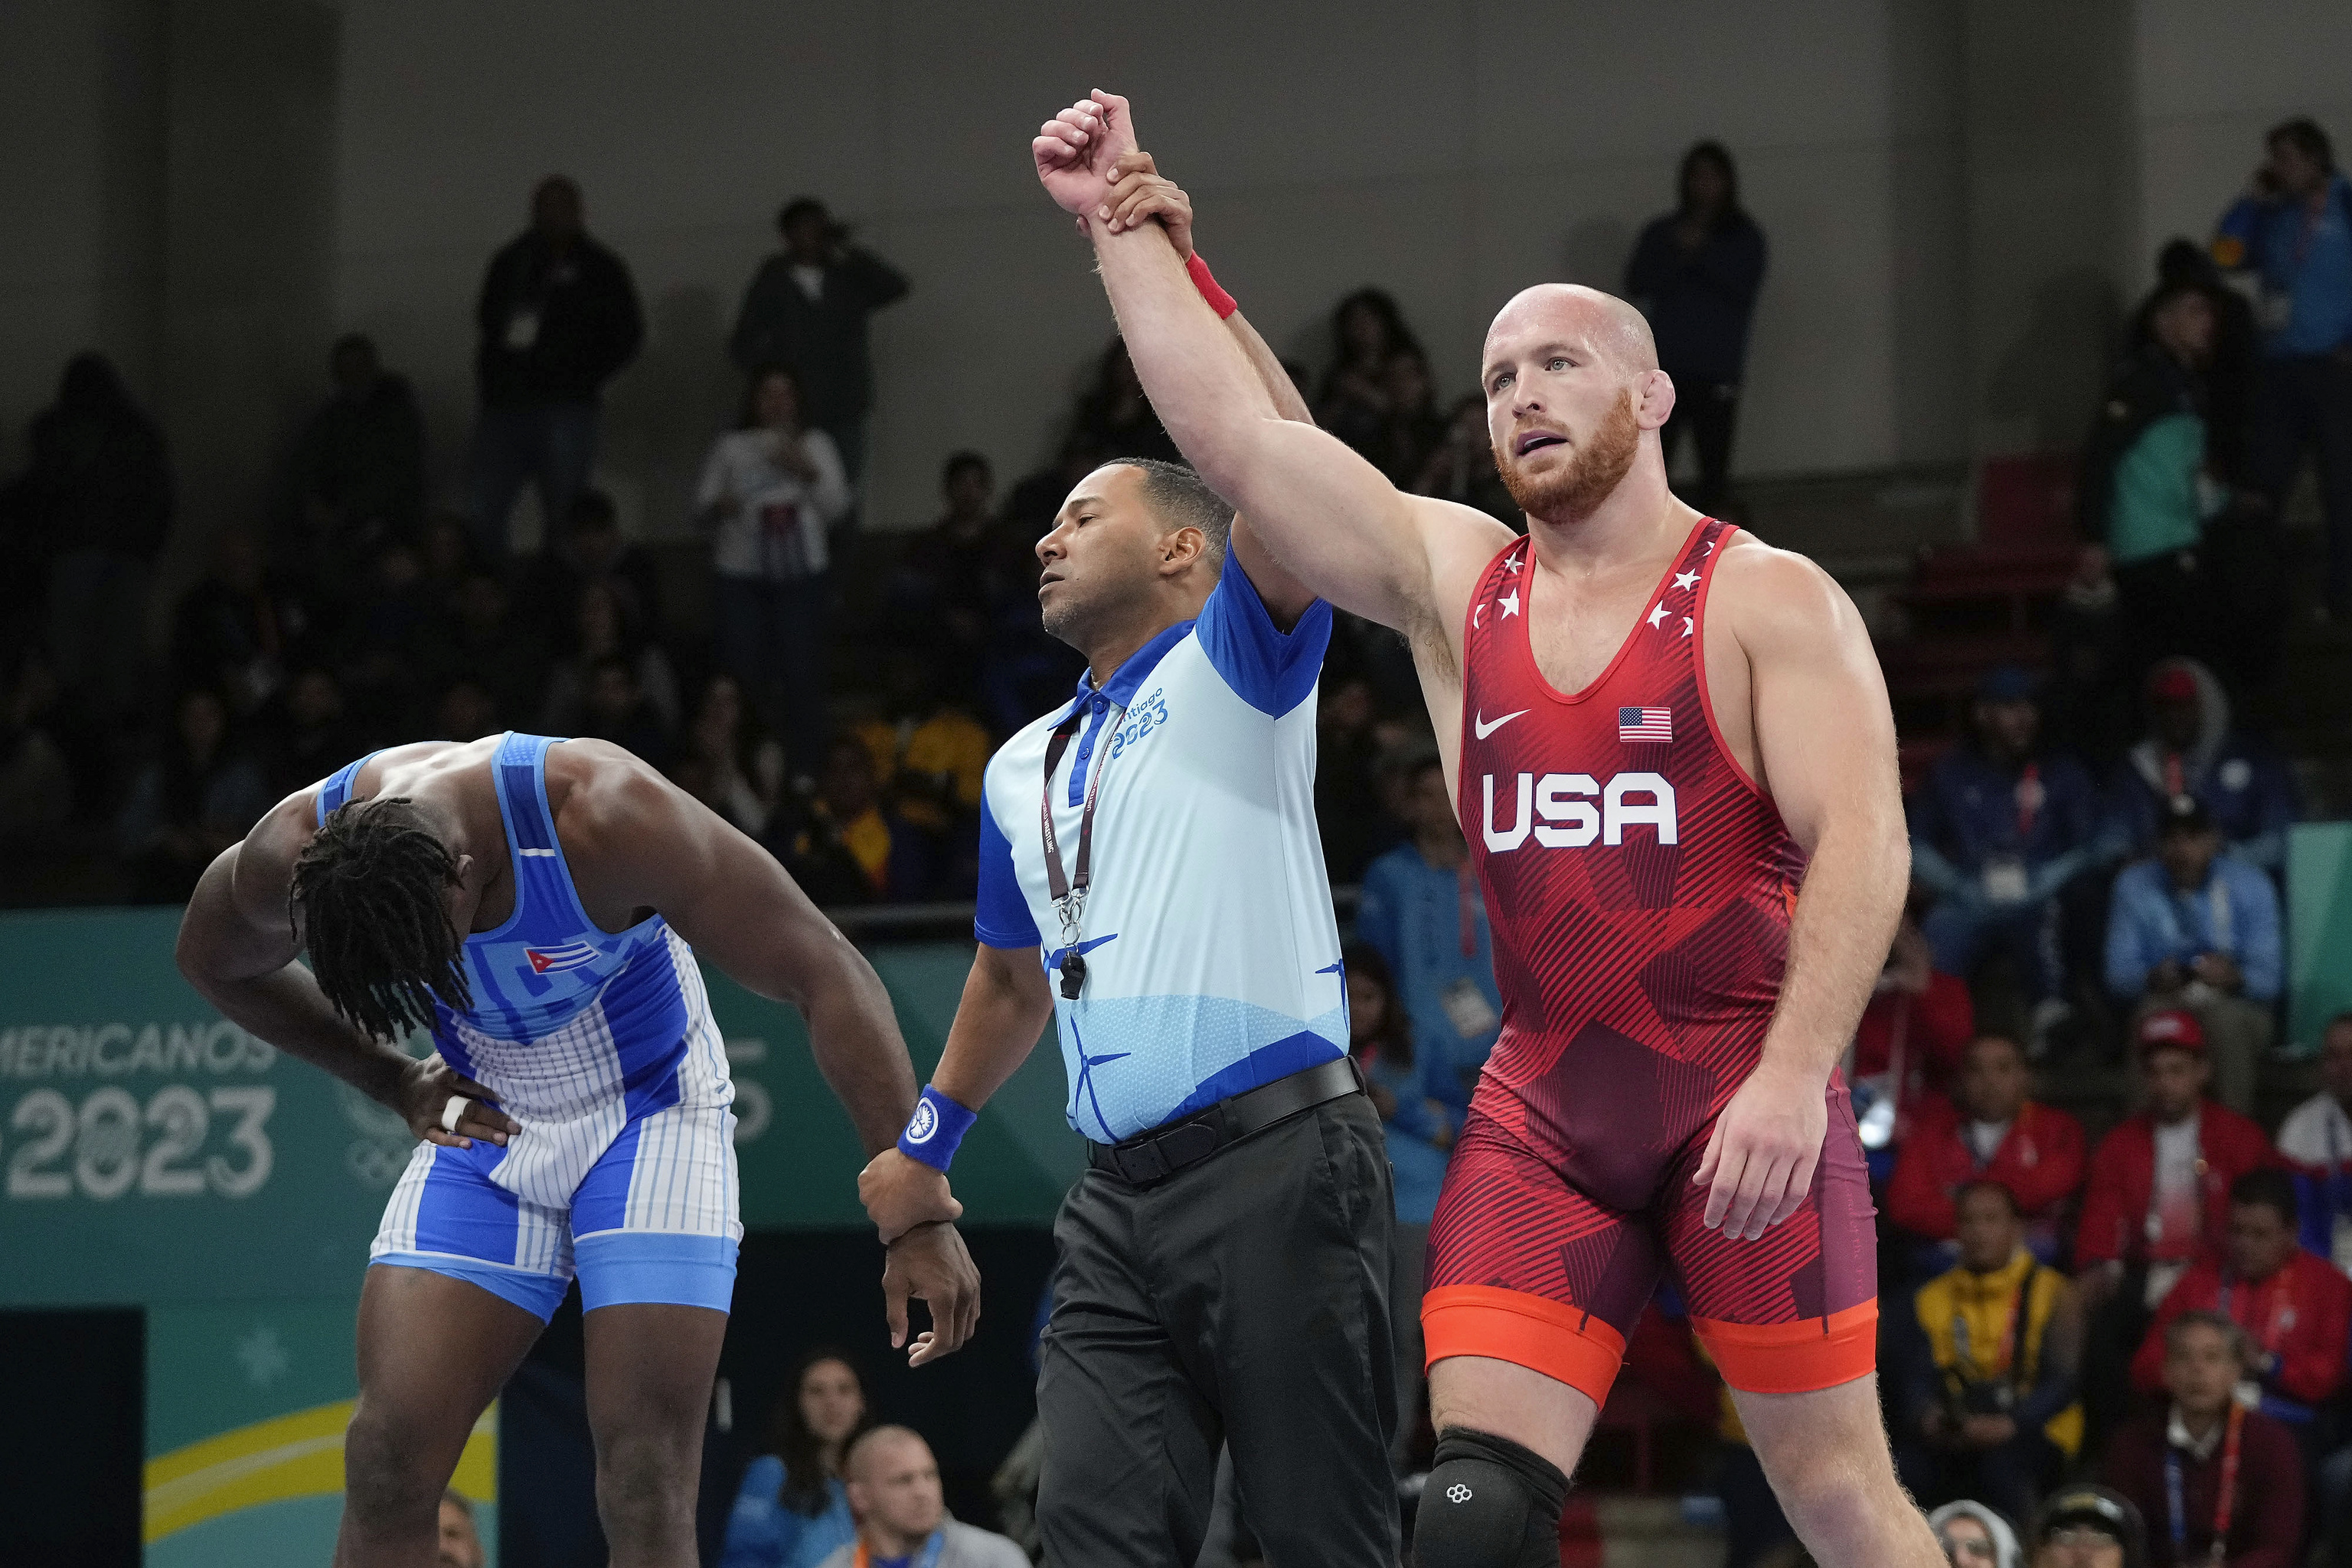 Kyle Snyder celebrates gold at the Pan American Games.